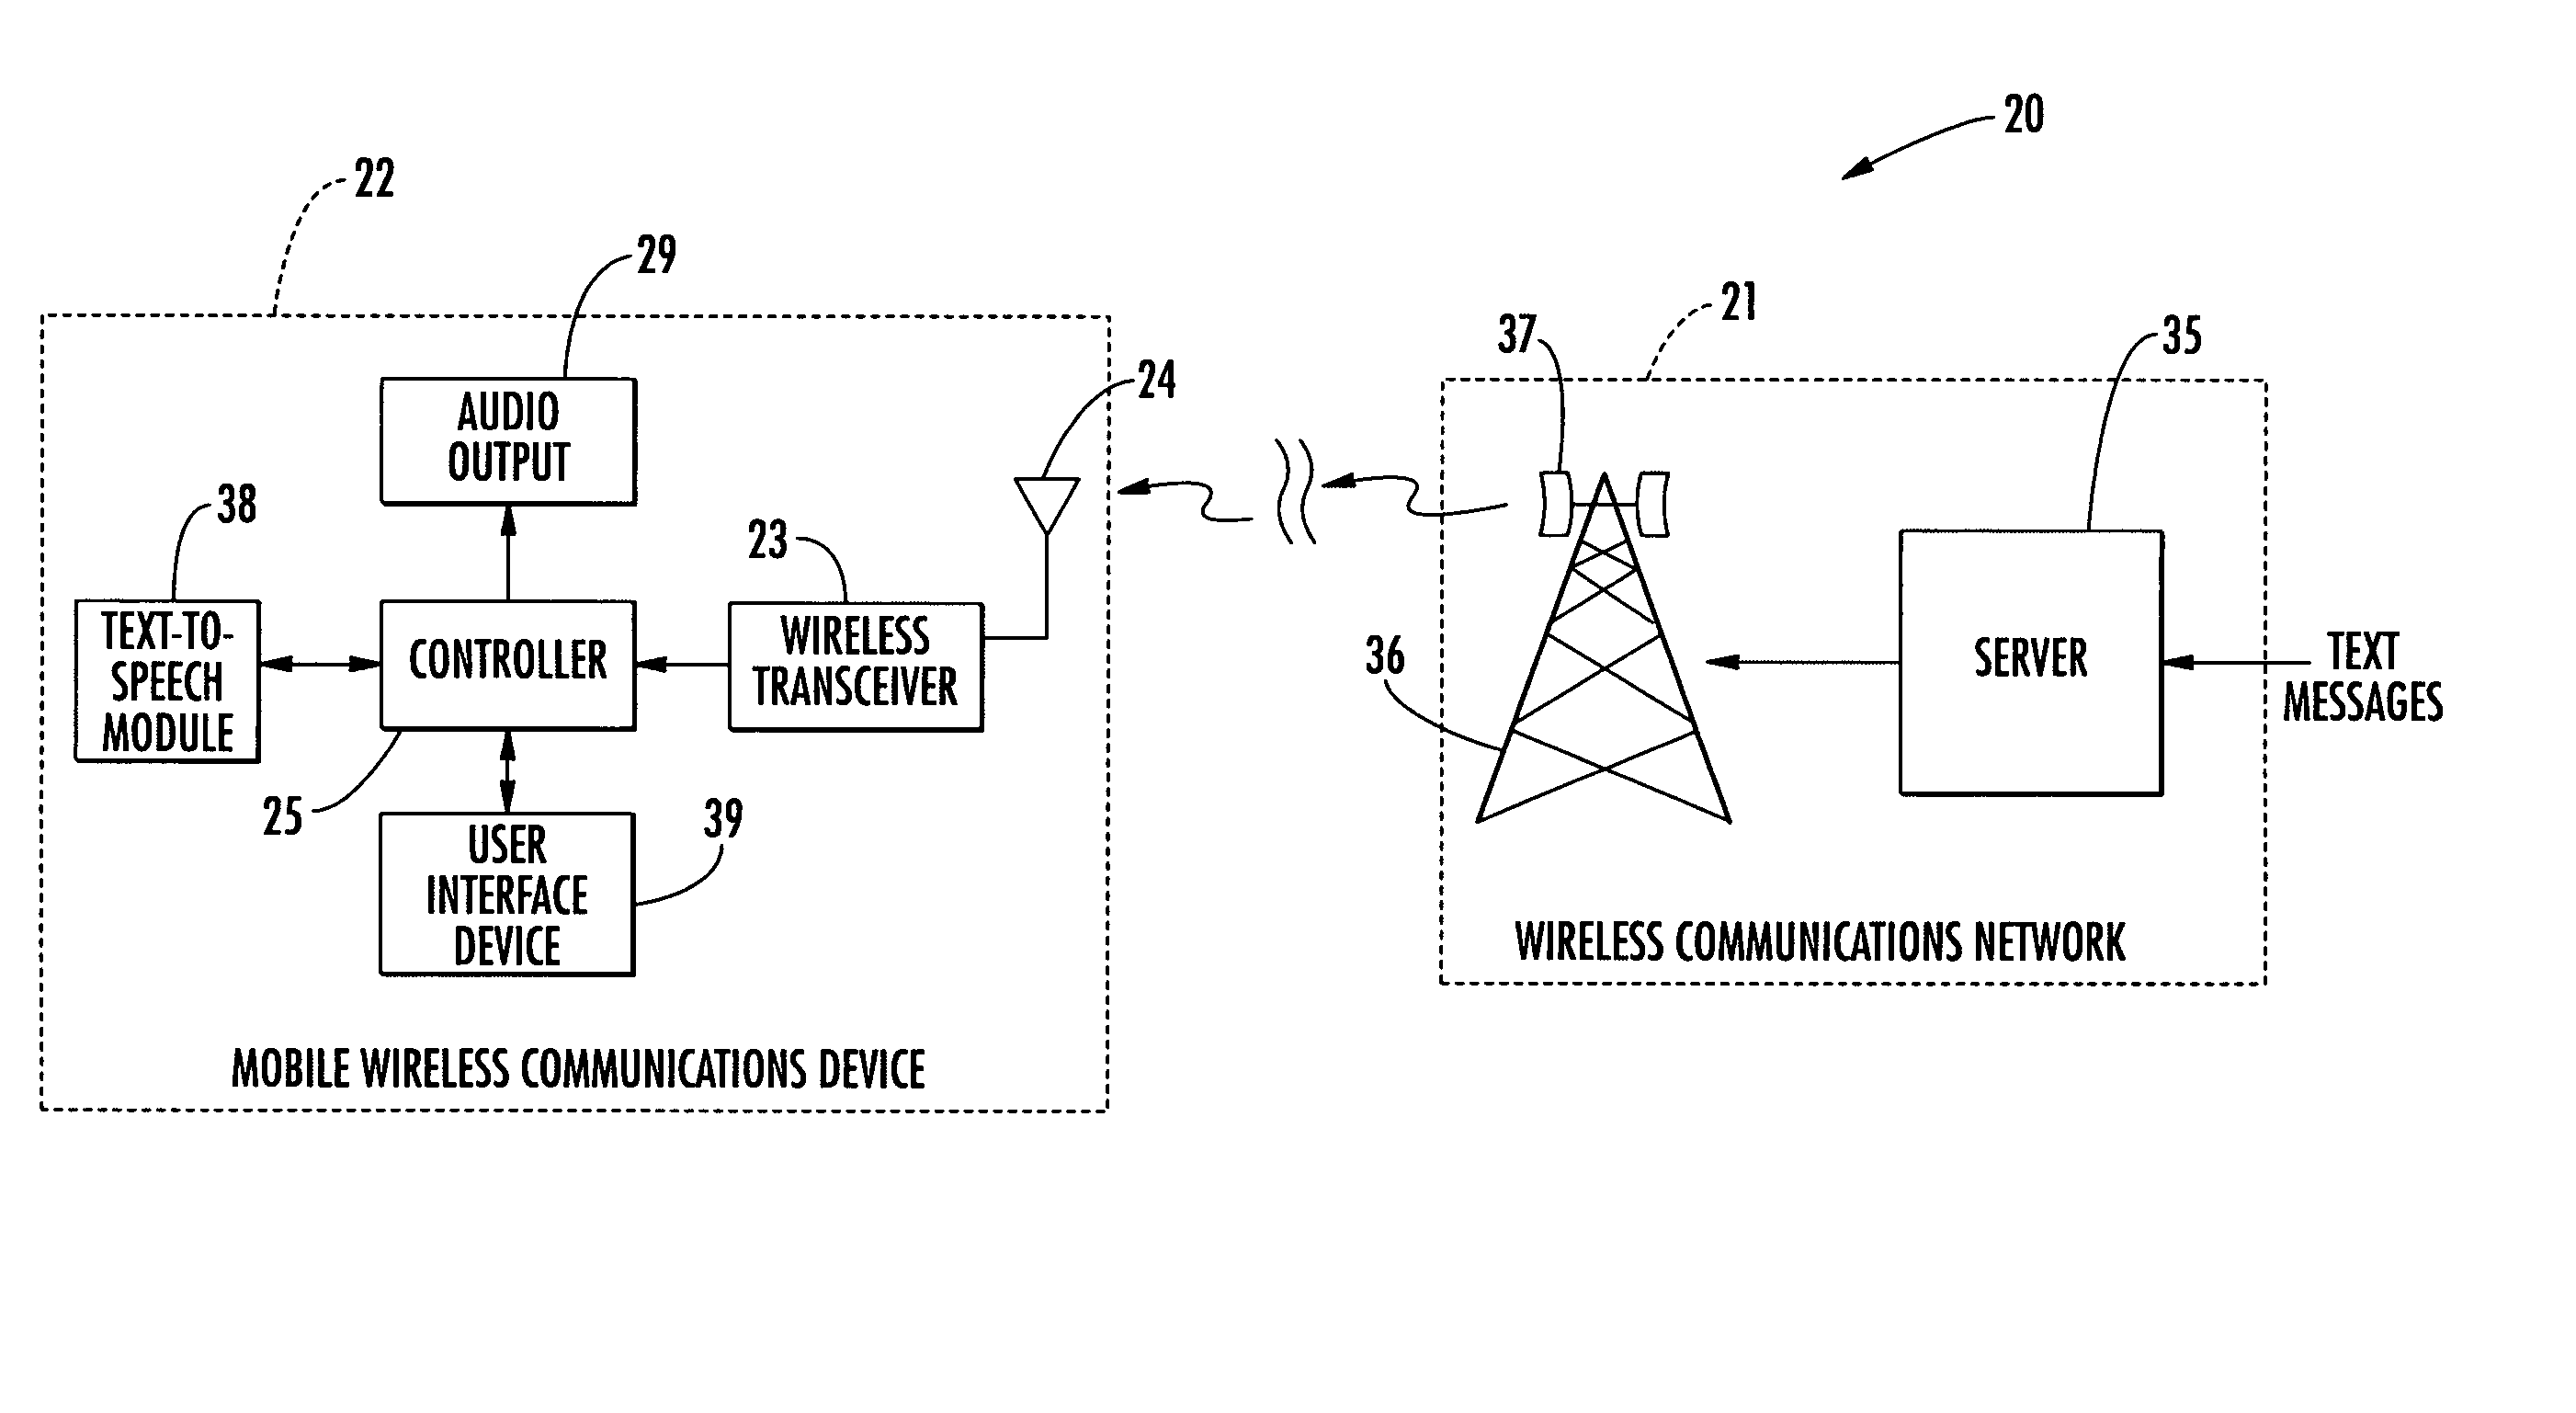 Communications system providing text-to-speech message conversion features using audio filter parameters and related methods